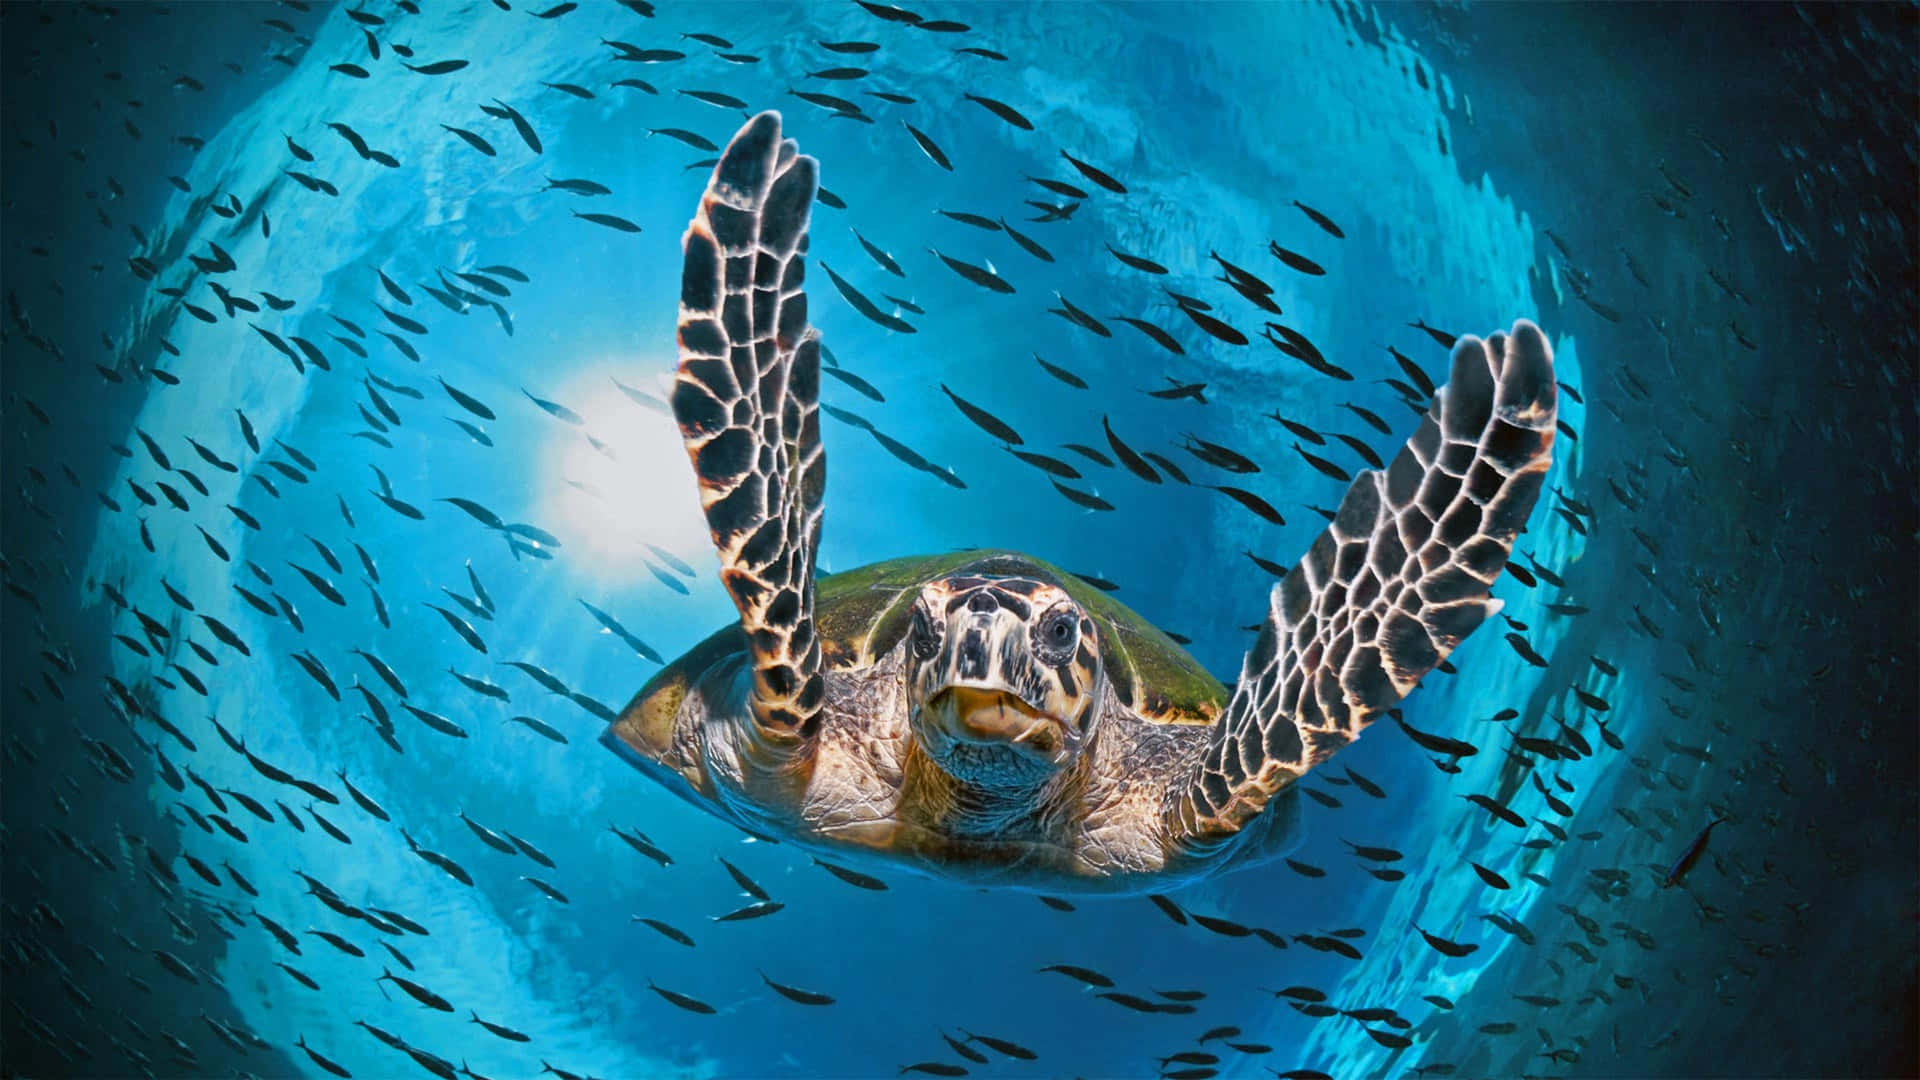 Green Sea Turtle Surroundedby Fish Wallpaper